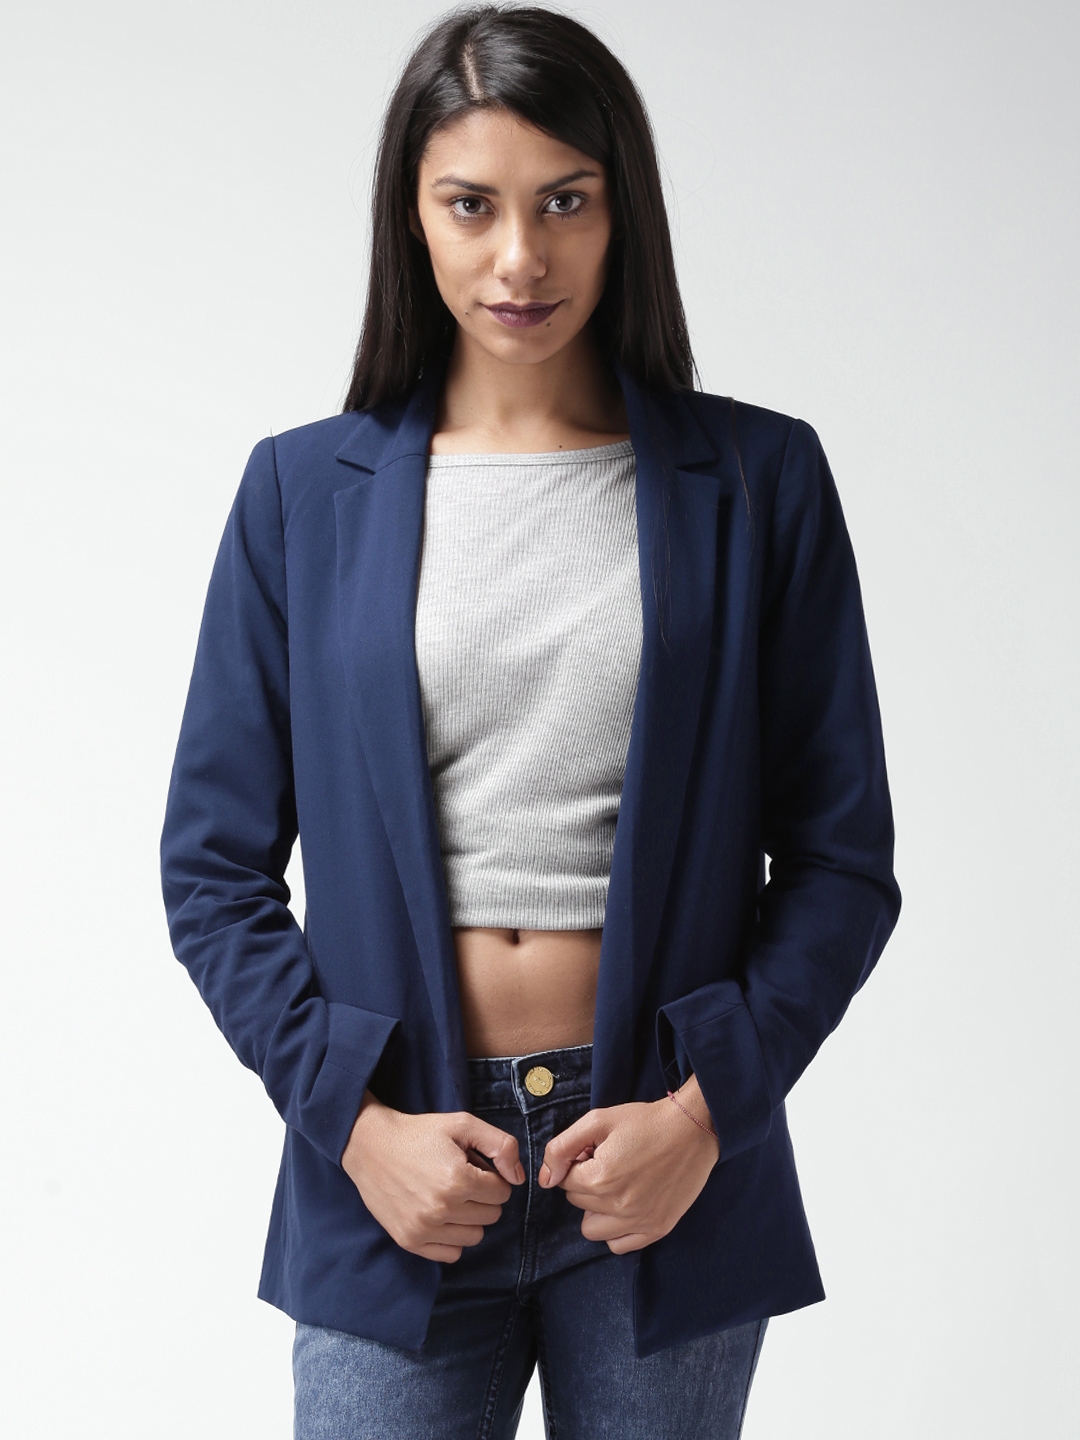 Buy FOREVER 21 Blue Jacket - Jackets for Women 1152608 | Myntra